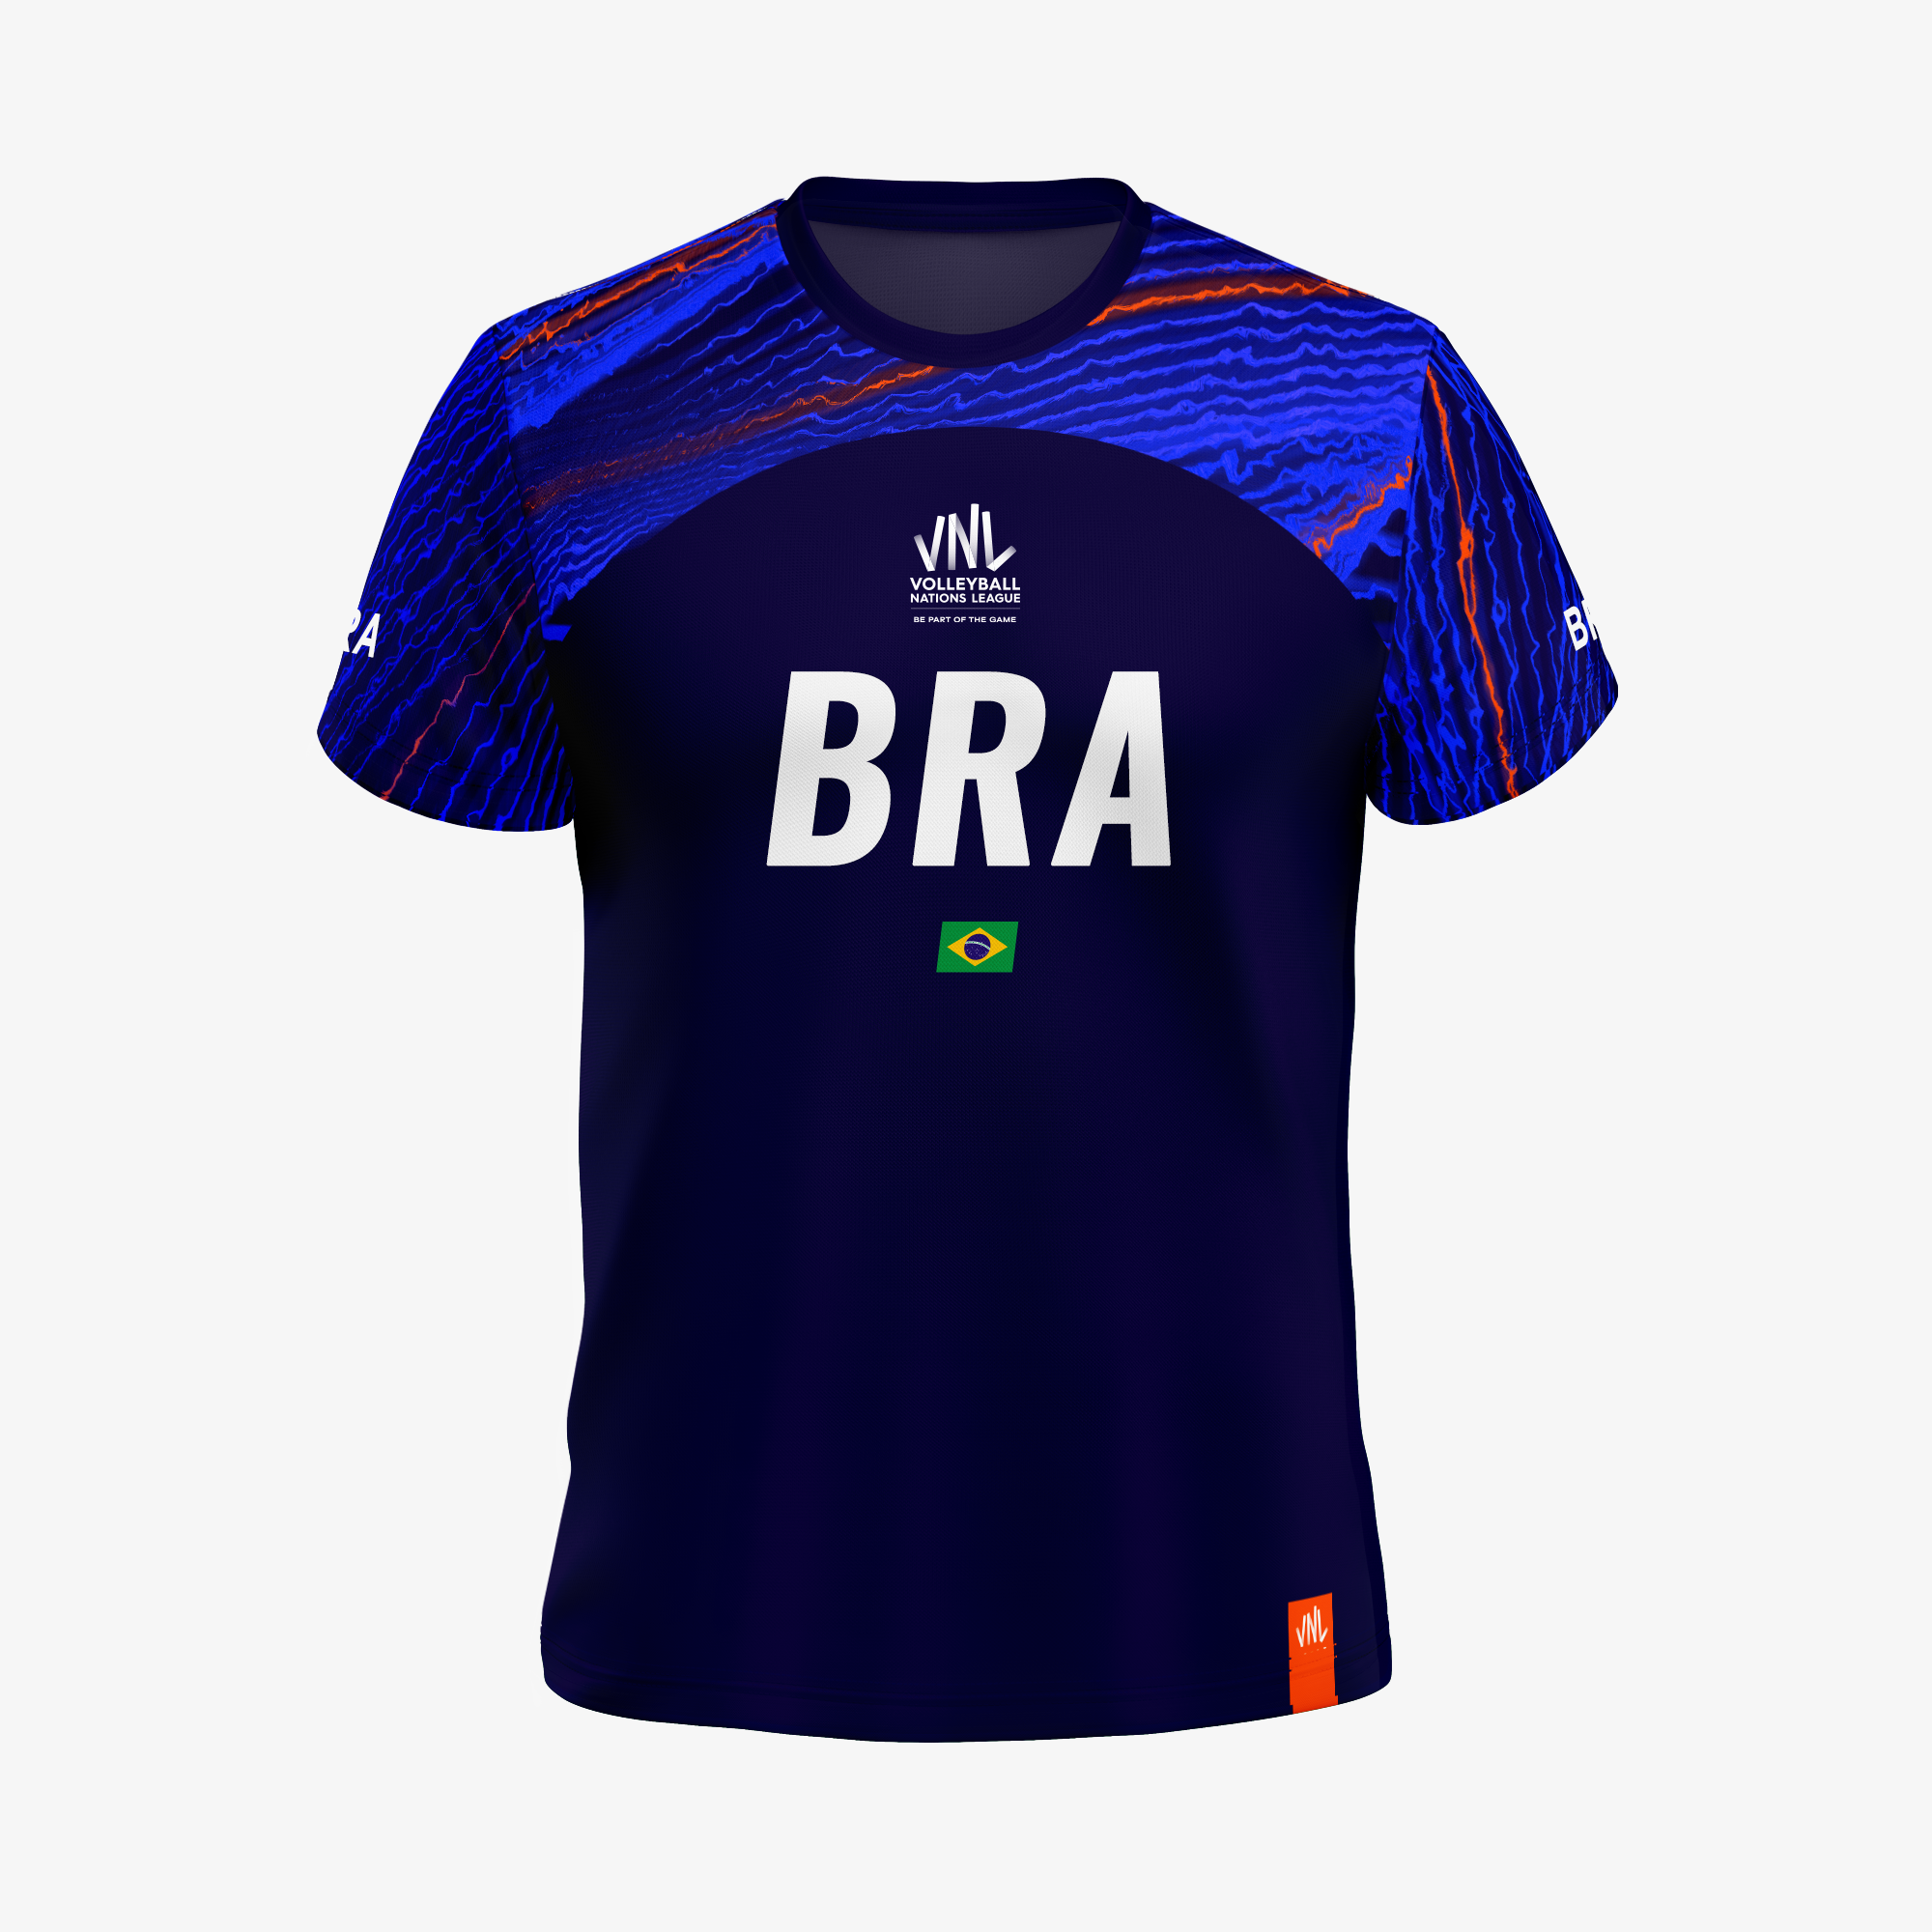 Brazil 2022 World Championships Collection